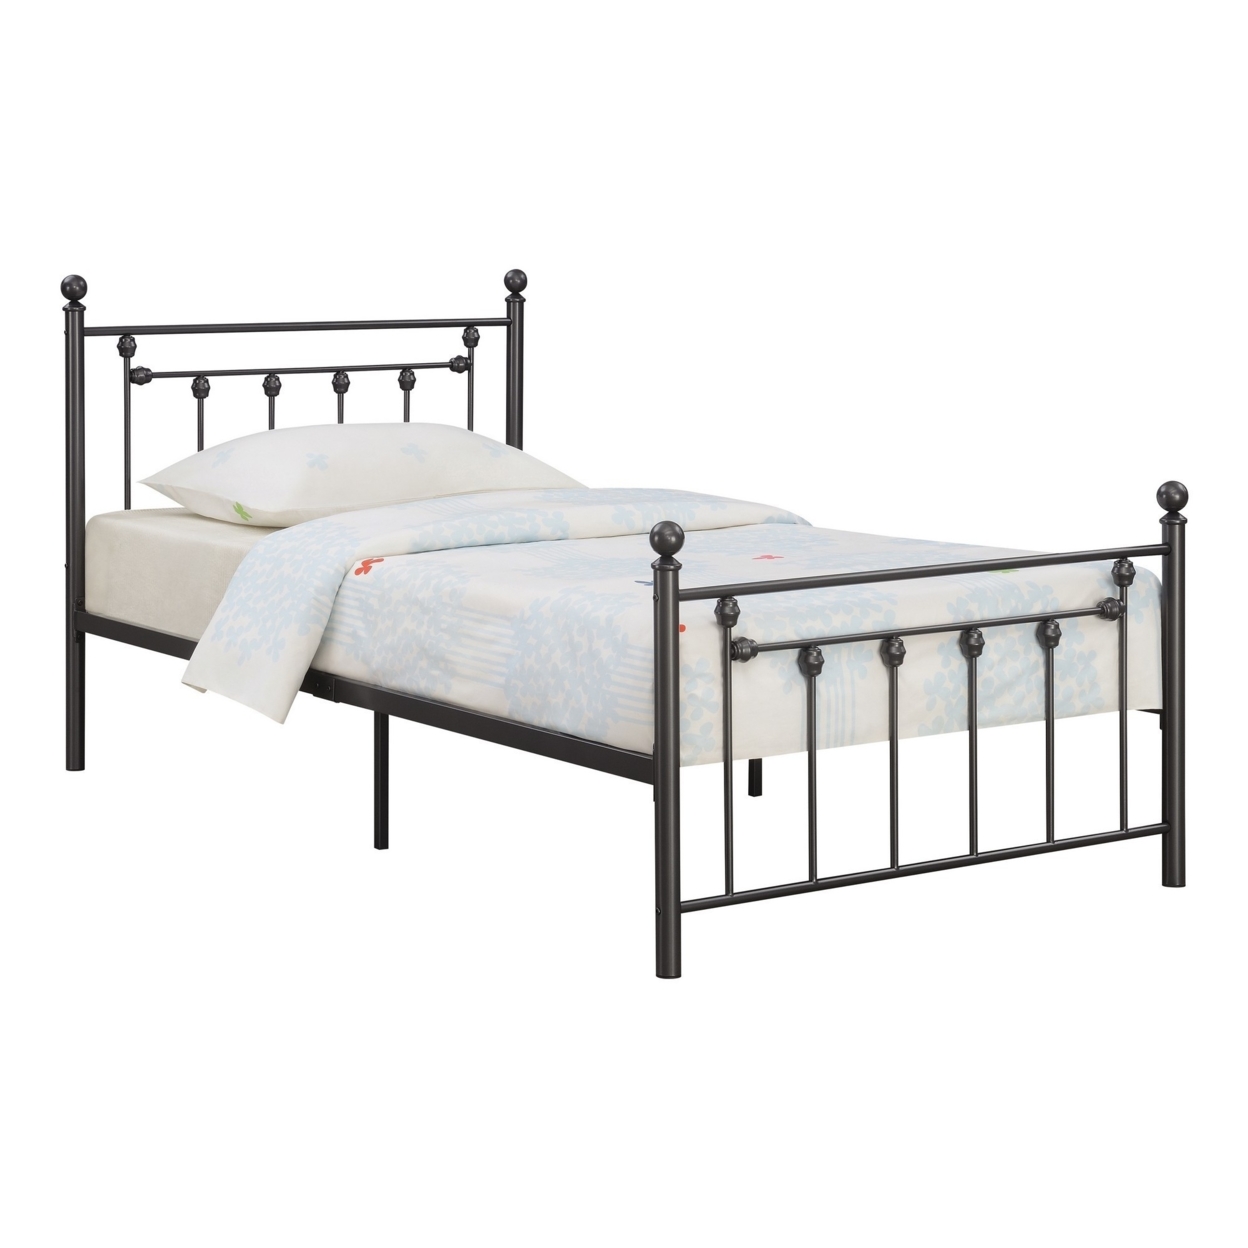 Dio 79 Inch Metal Twin Size Bed Frame, Spindle Design, Finial Posts, Black